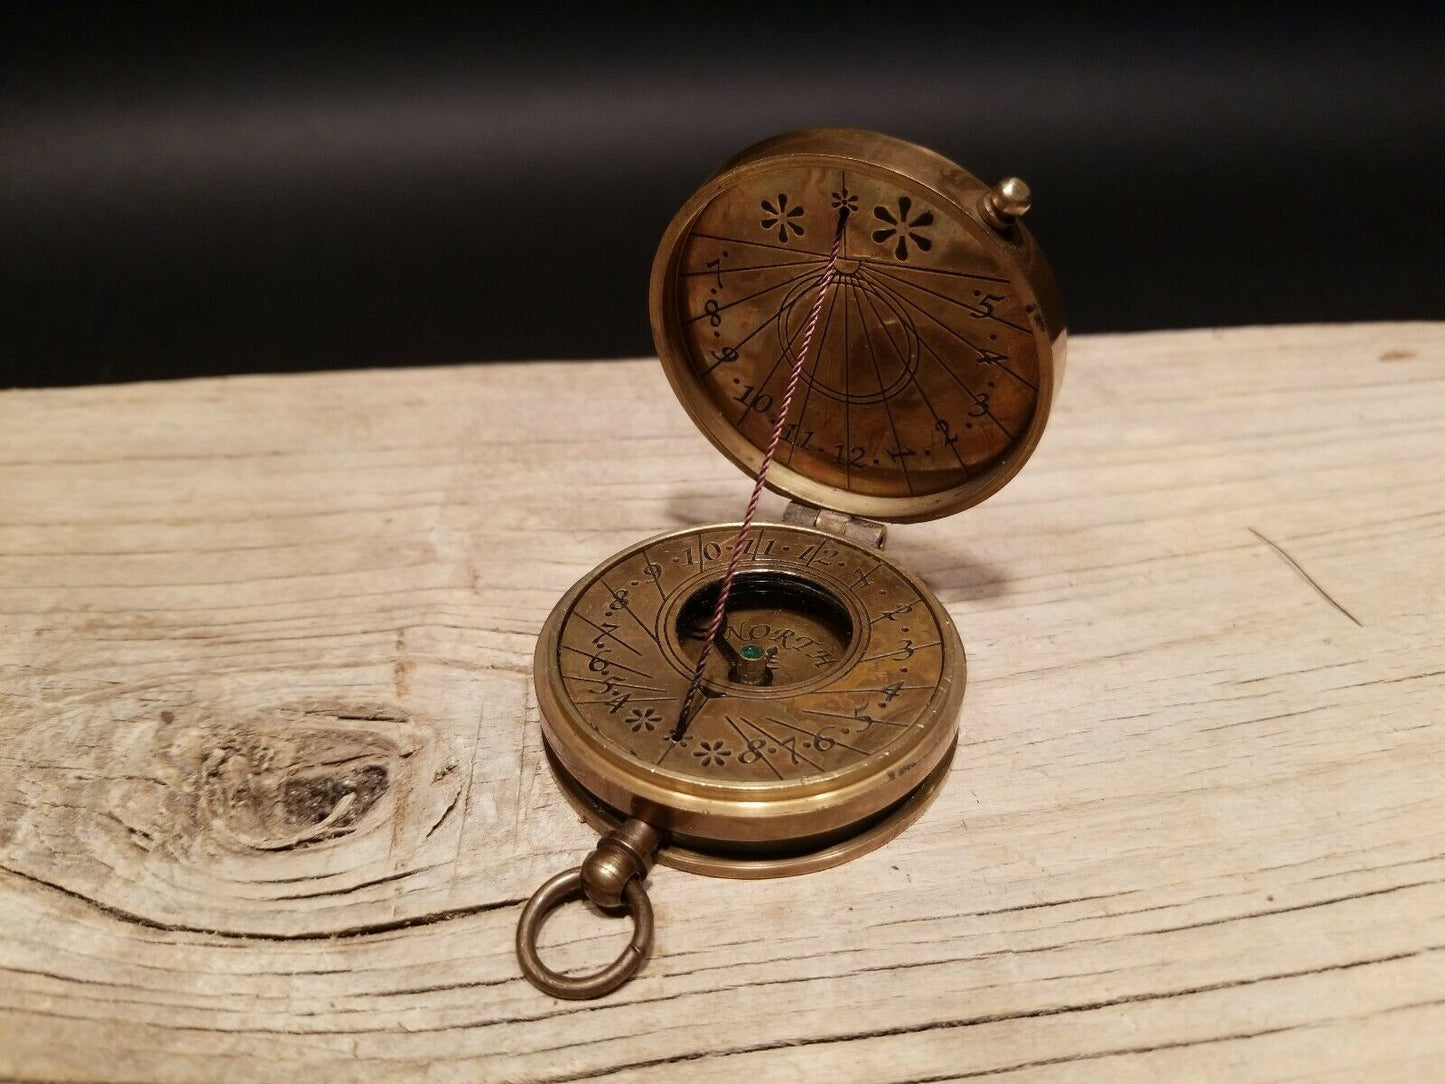 Vintage Antique Style Sundial Compass - Early Home Decor